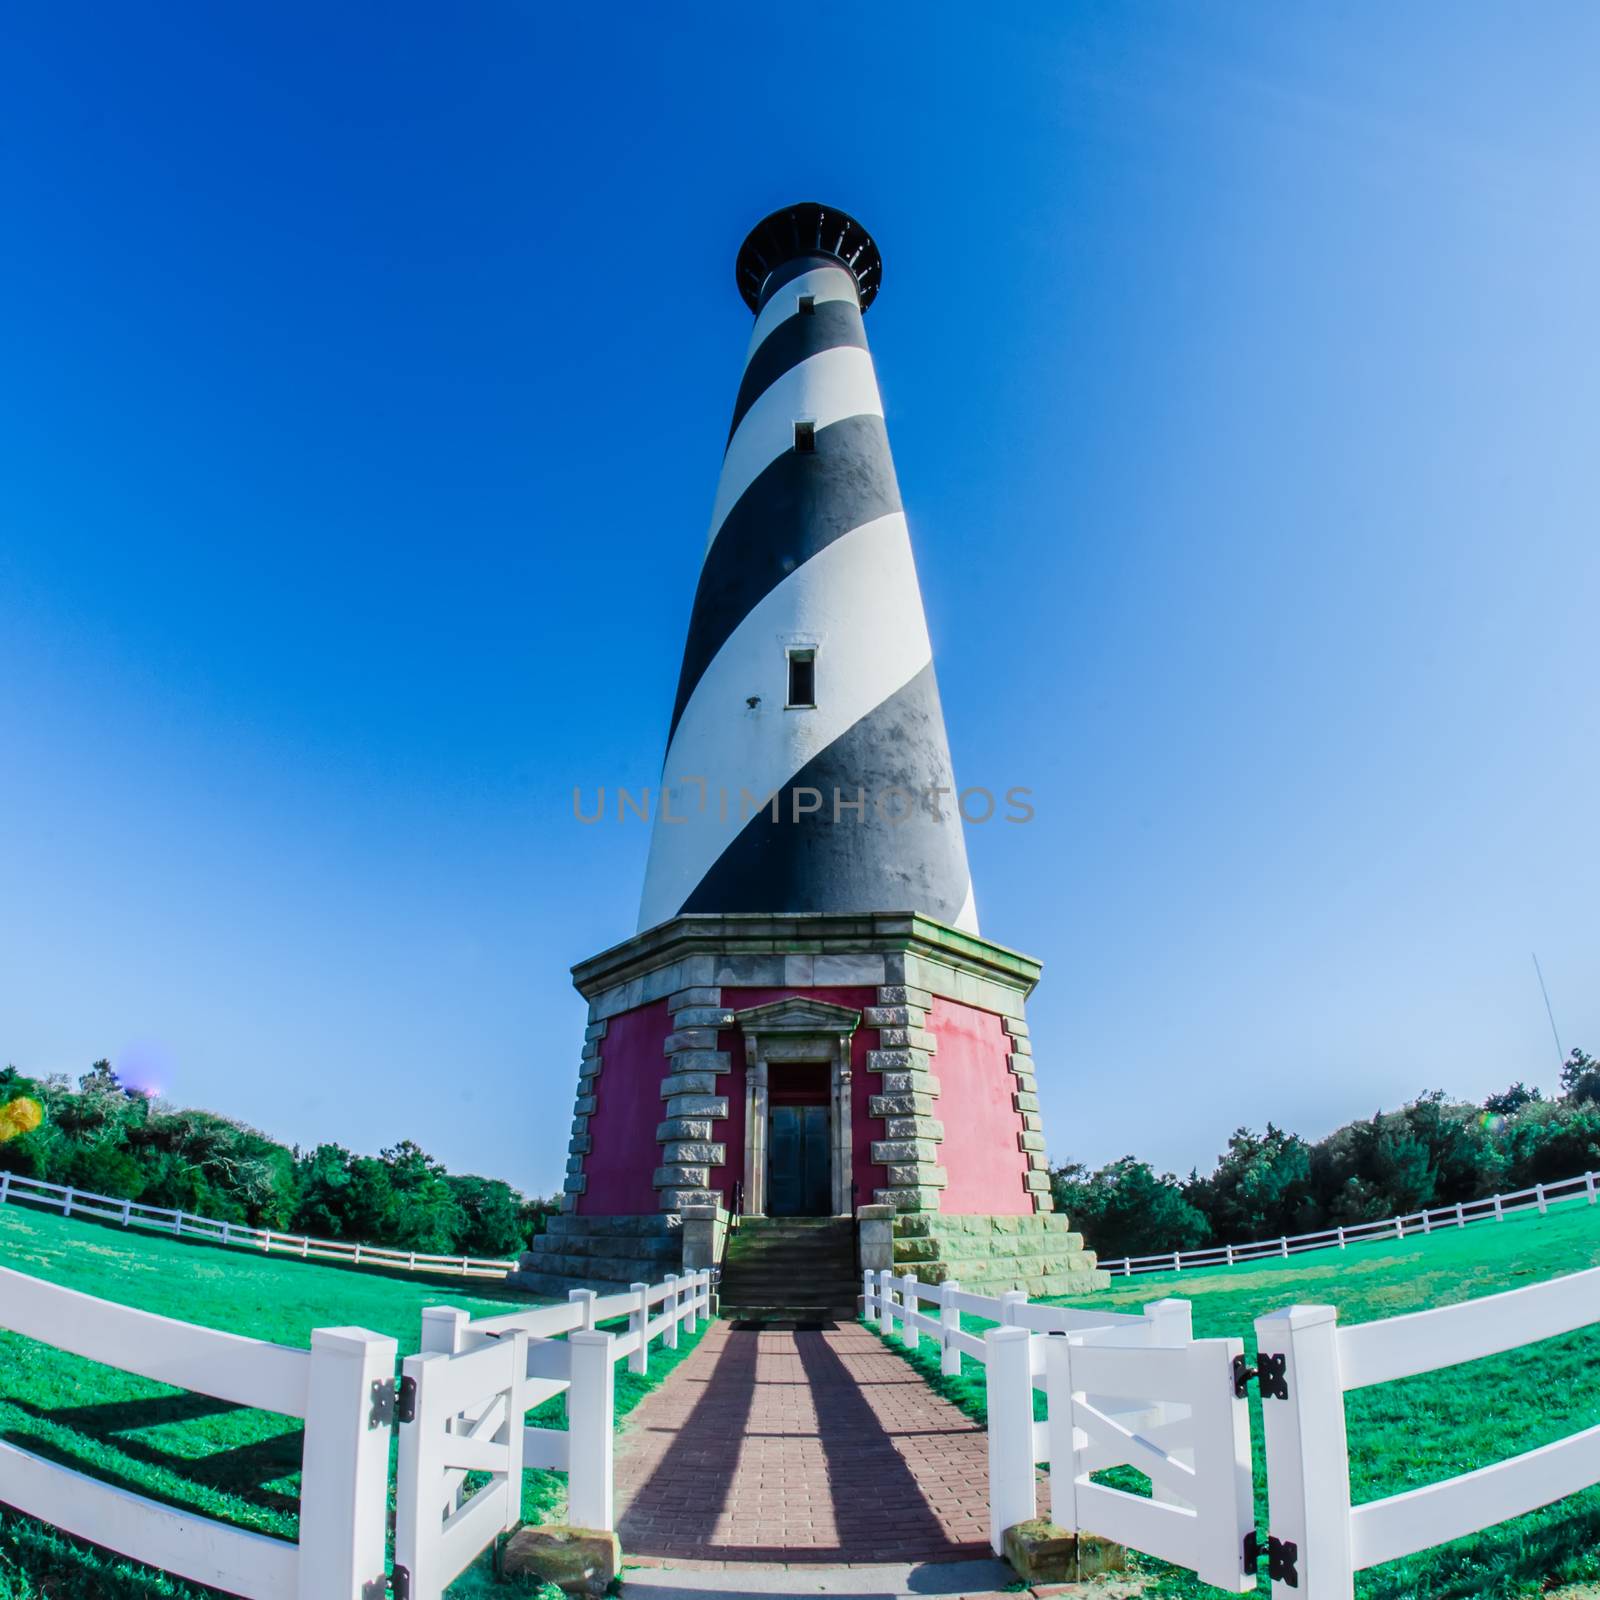 Diagonal black and white stripes mark the Cape Hatteras lighthouse at its new location near the town of Buxton on the Outer Banks of North Carolina